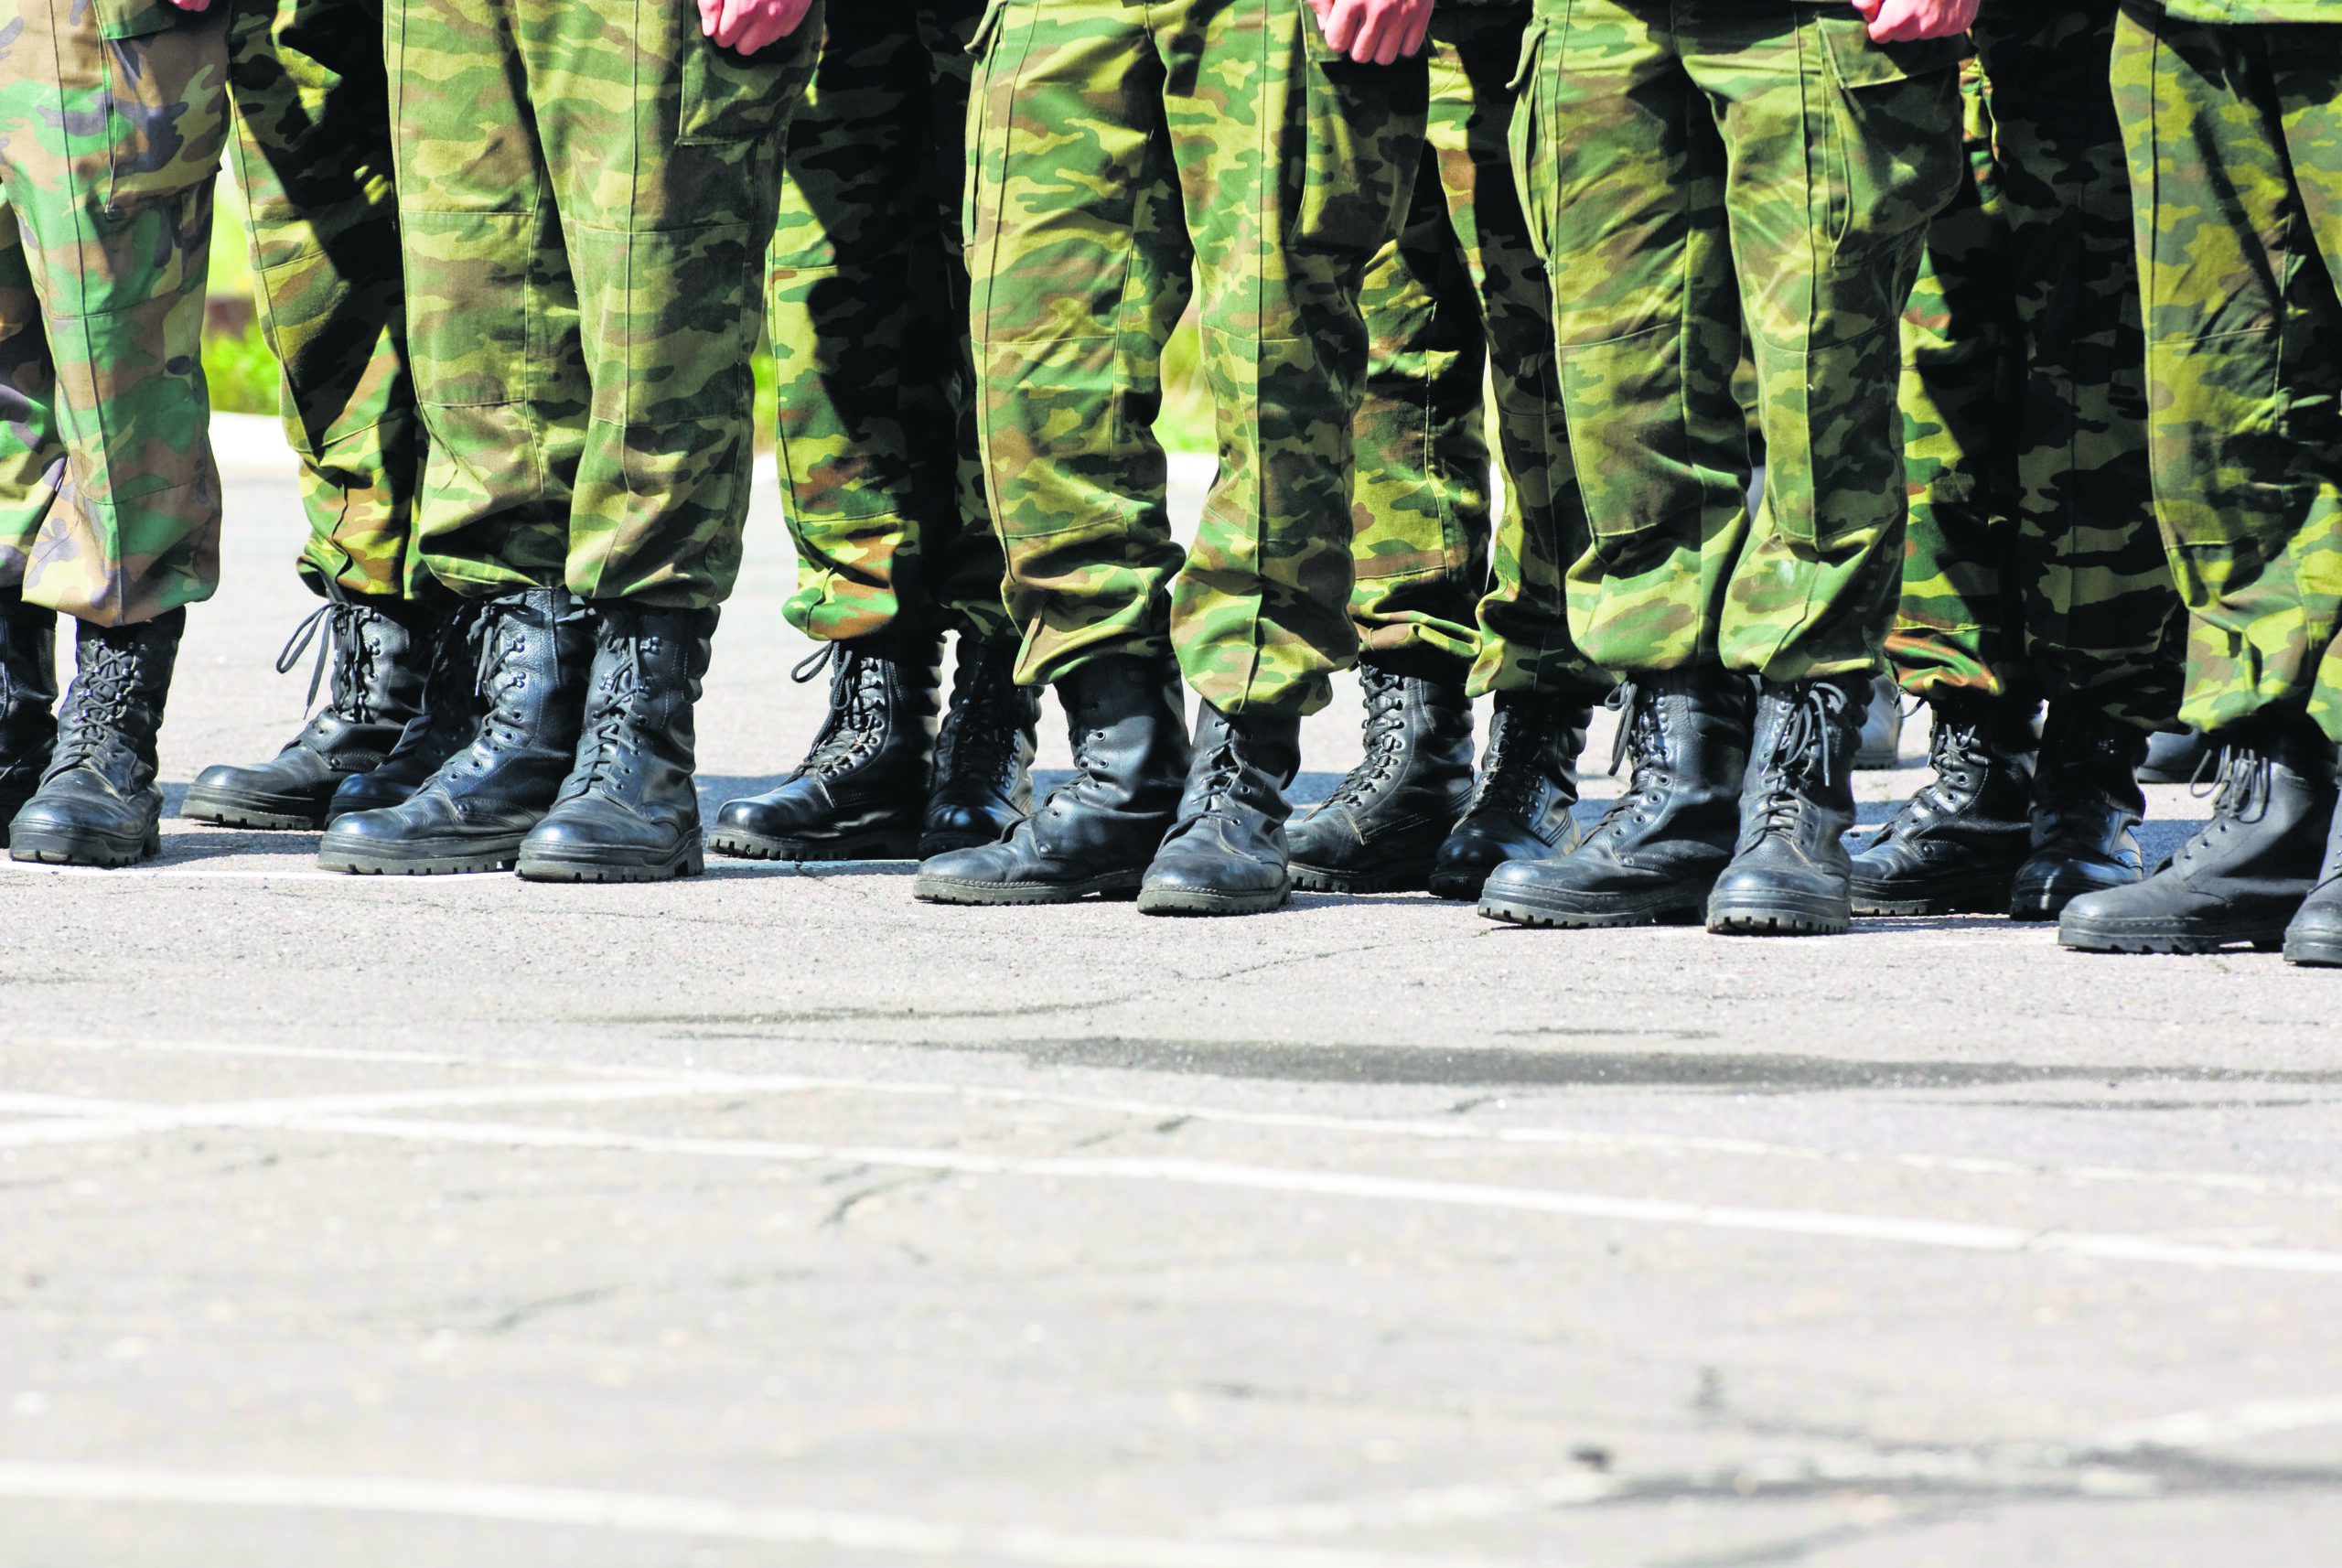 ‘Minimize casualties during operations' - TheDailyGuardian